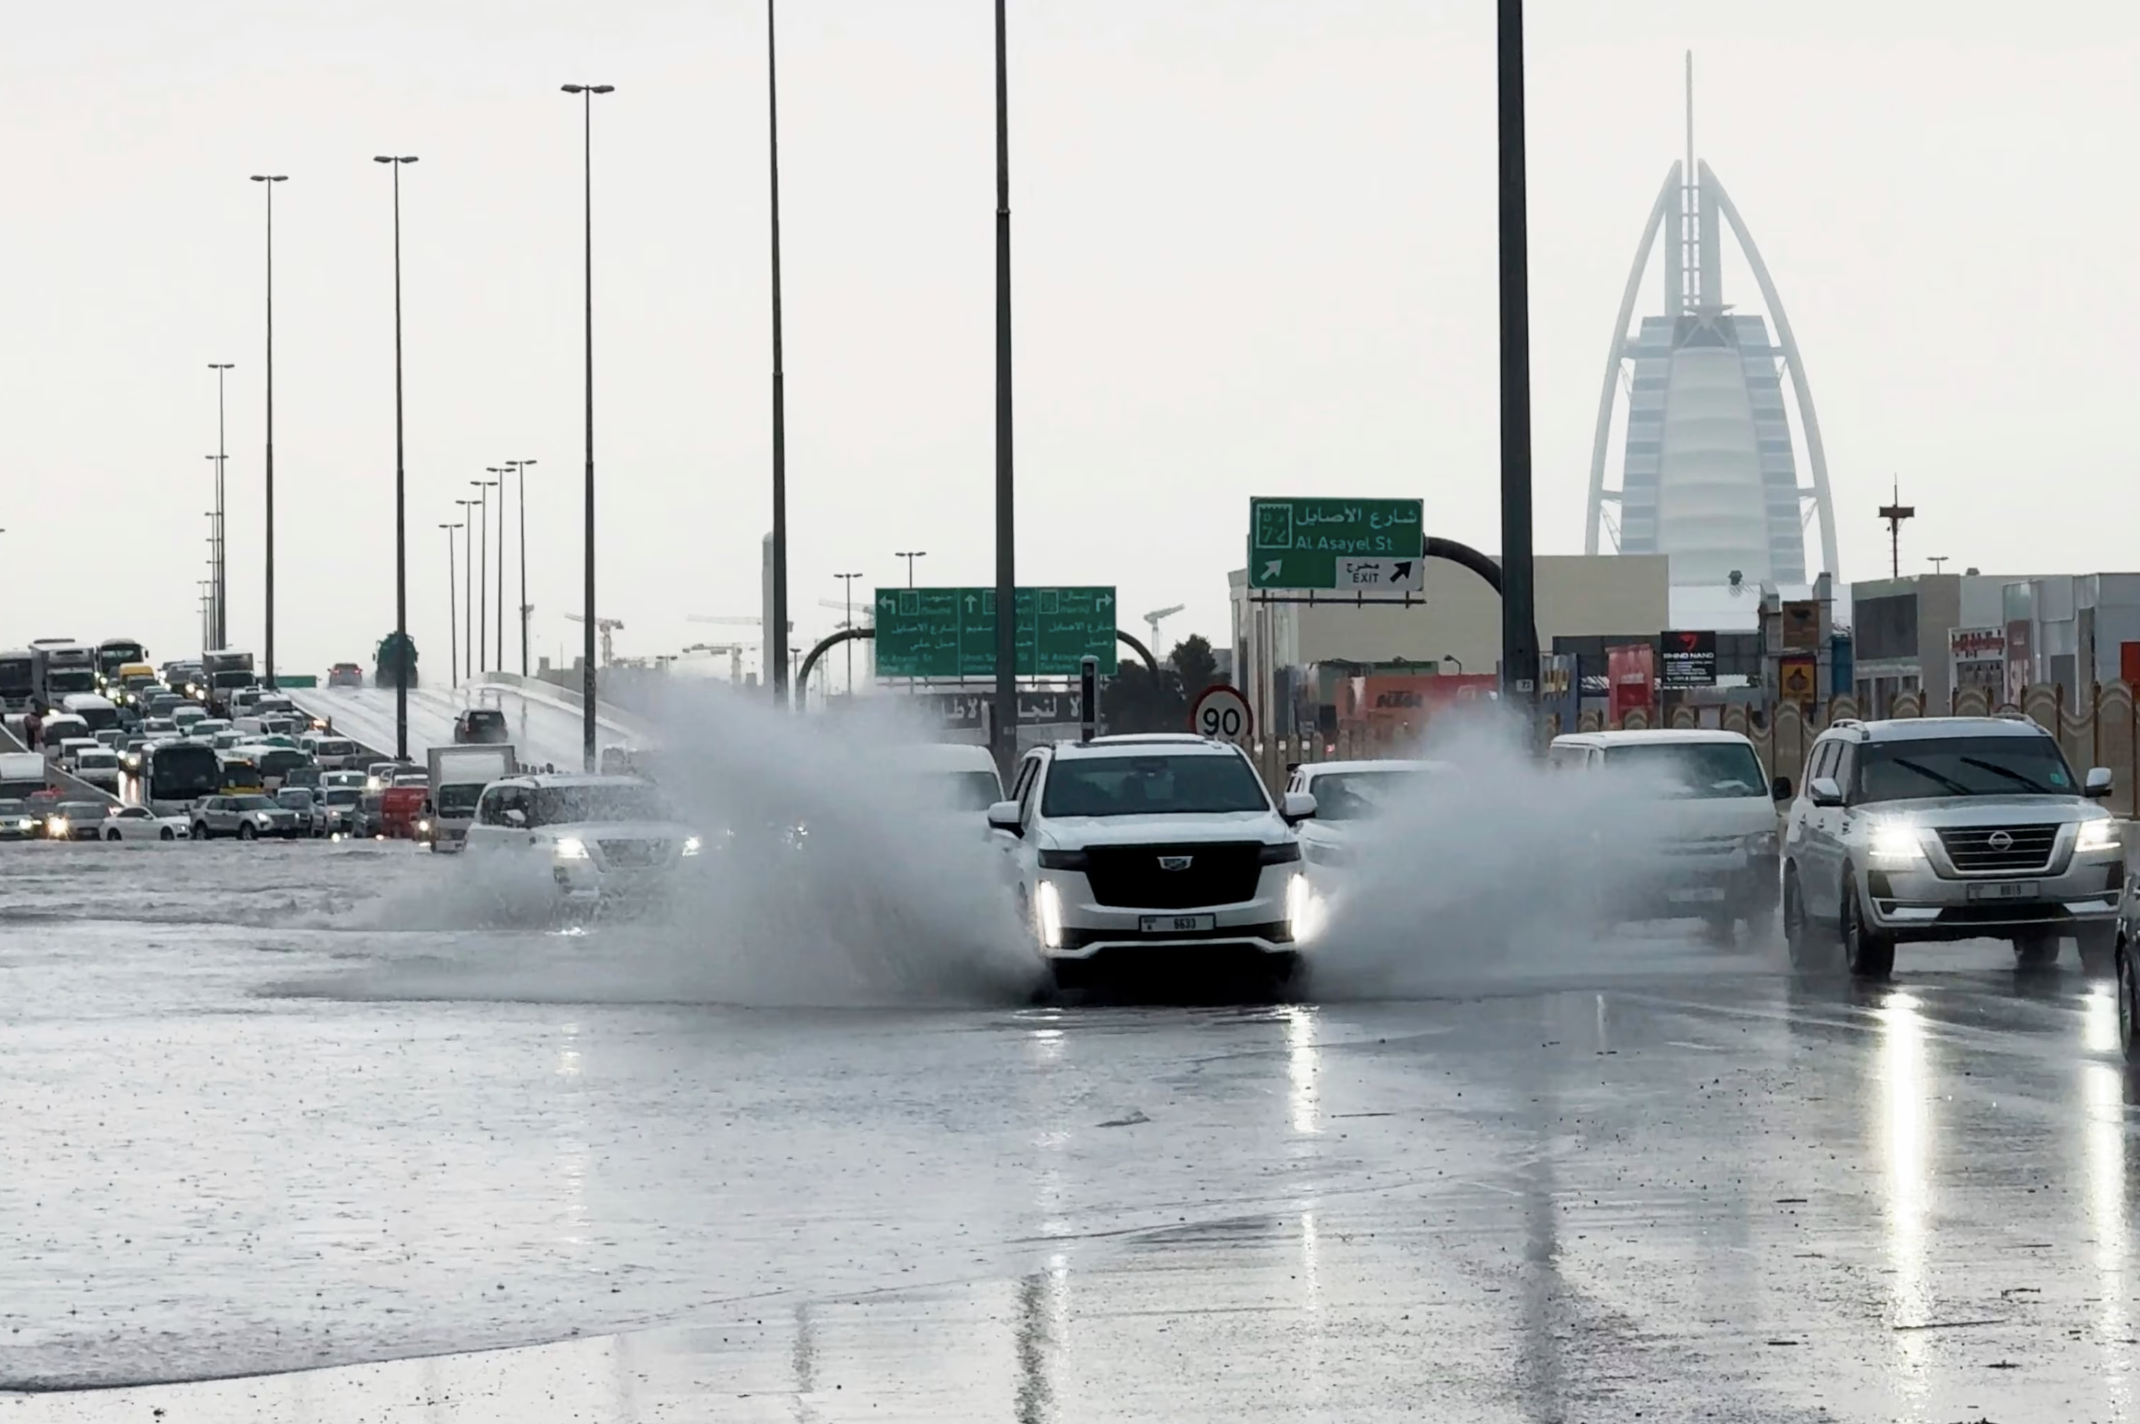 Desert deluge in Dubai as they get heaviest rainfall in 75 years